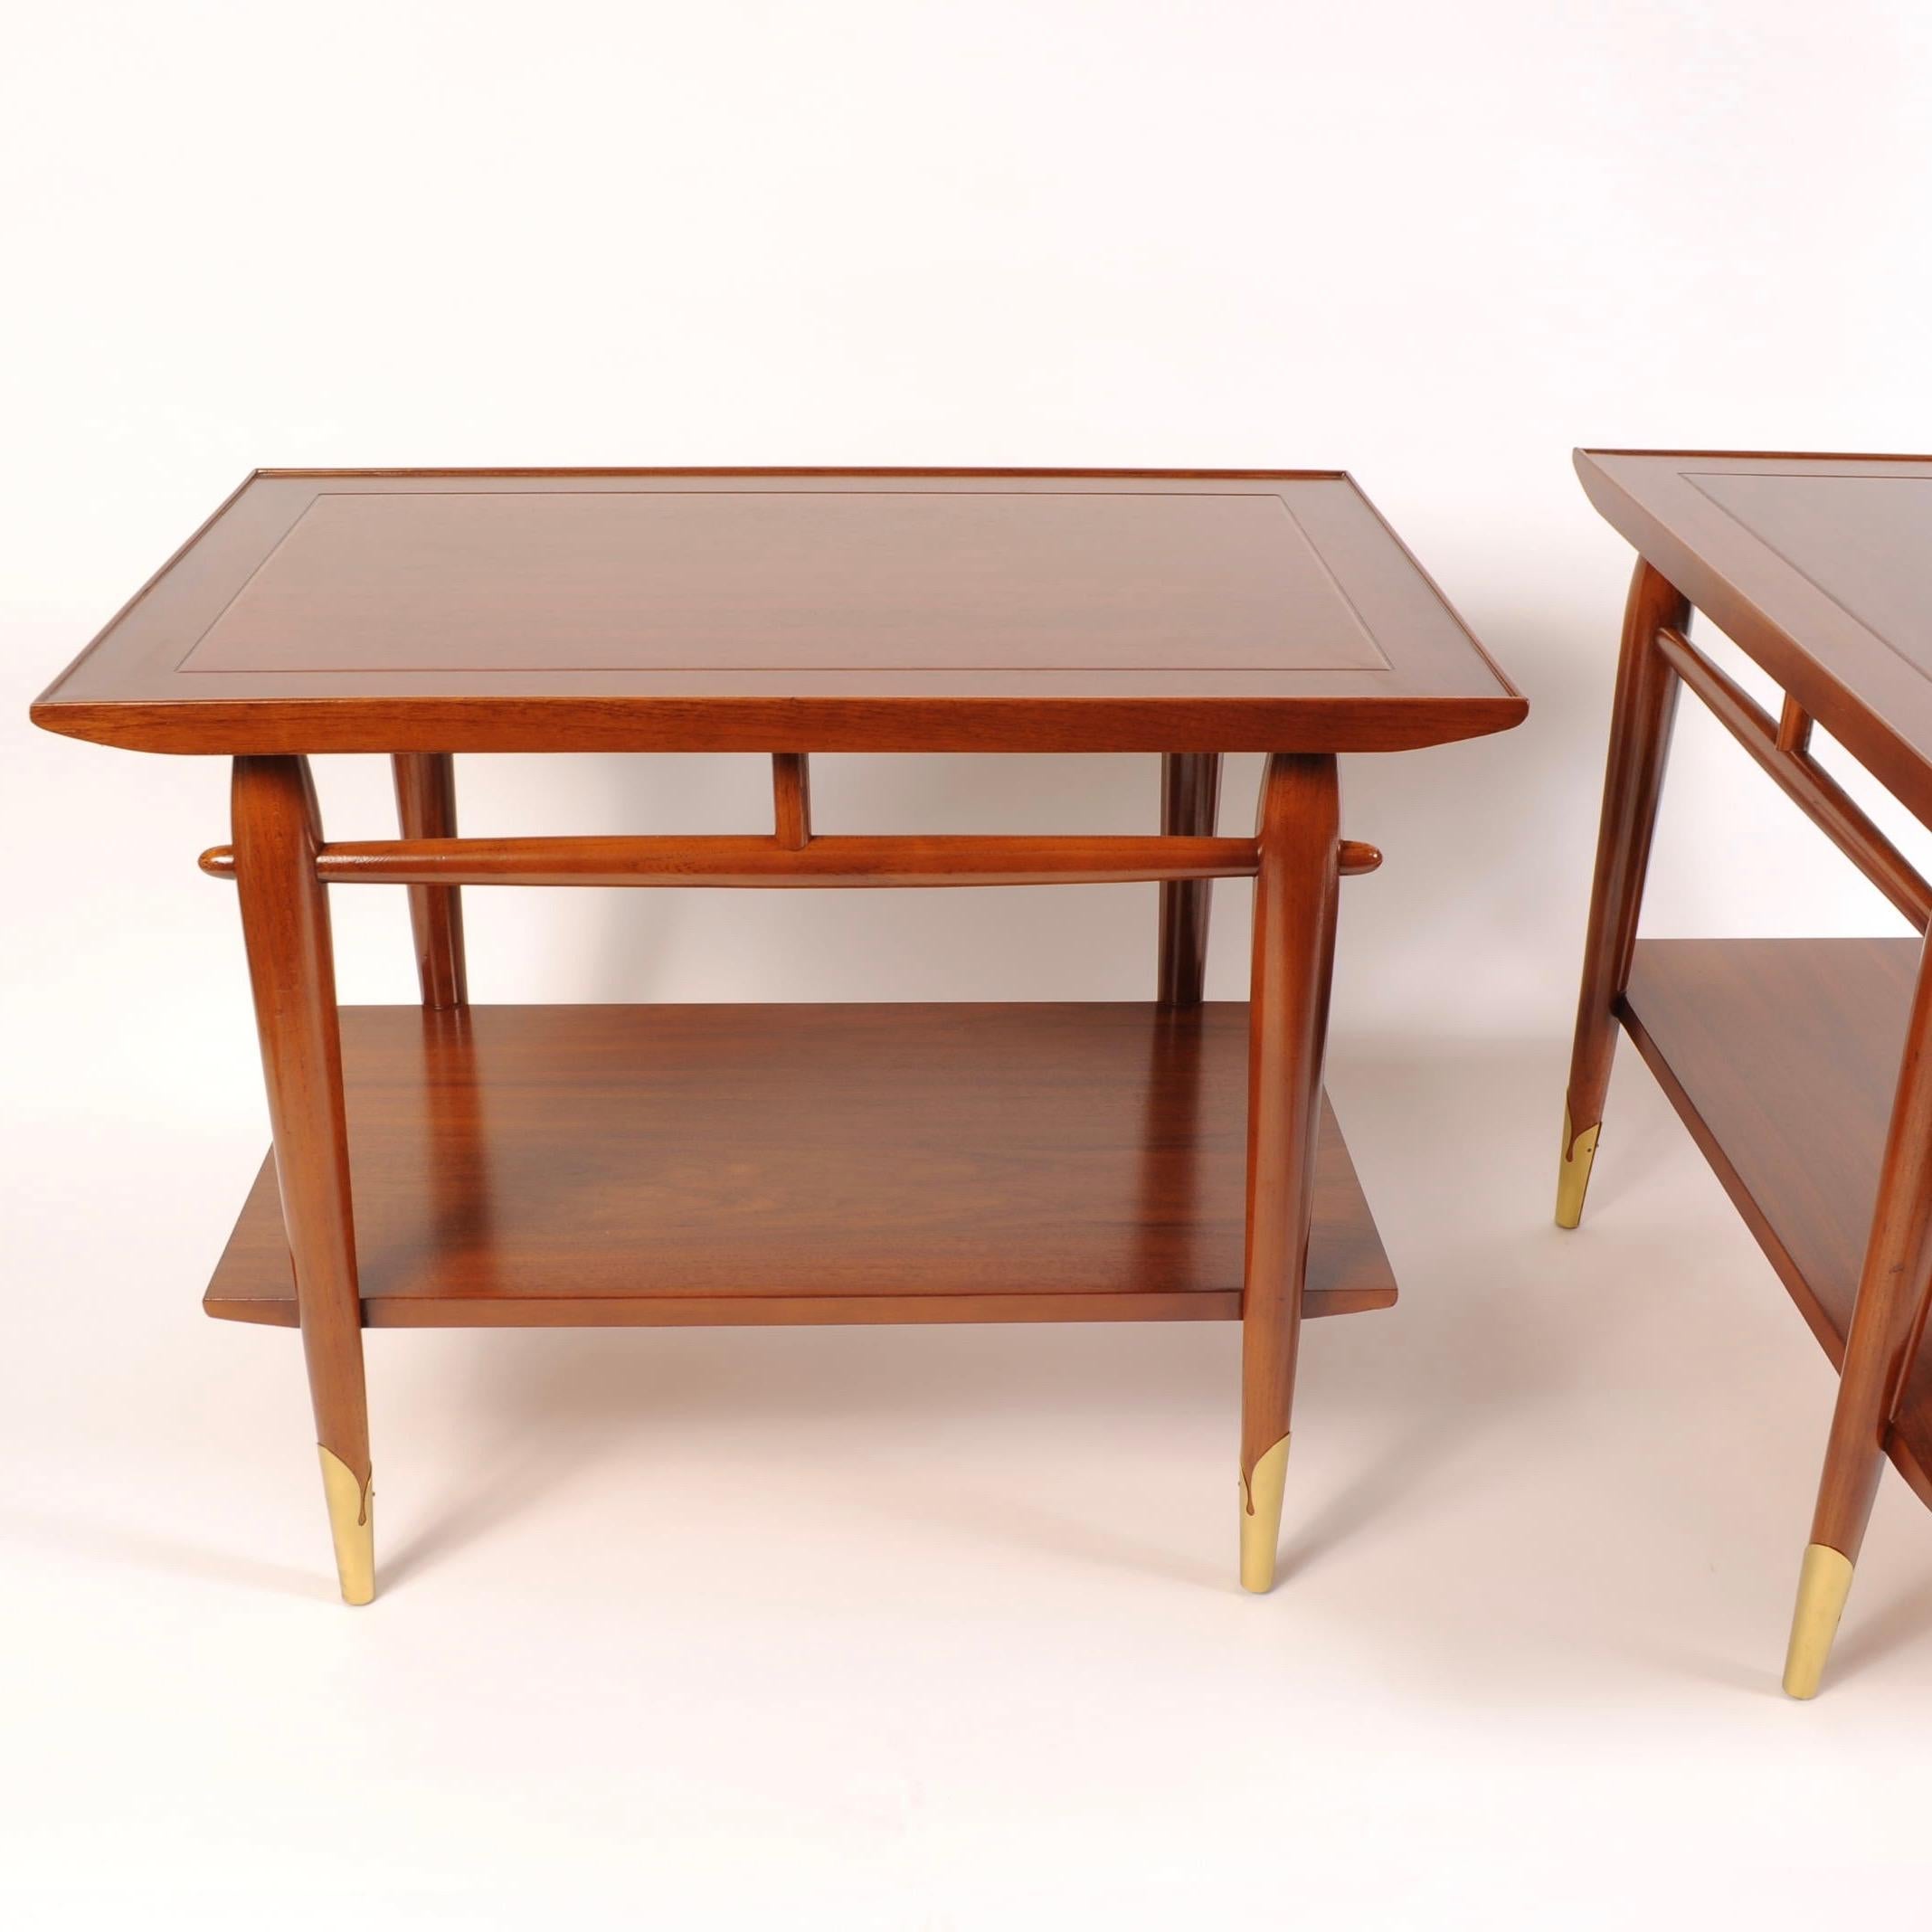 1960s era walnut end tables featuring lower shelves and sculptured legs with brass end caps. As clean a set as you could expect after 55+ years.